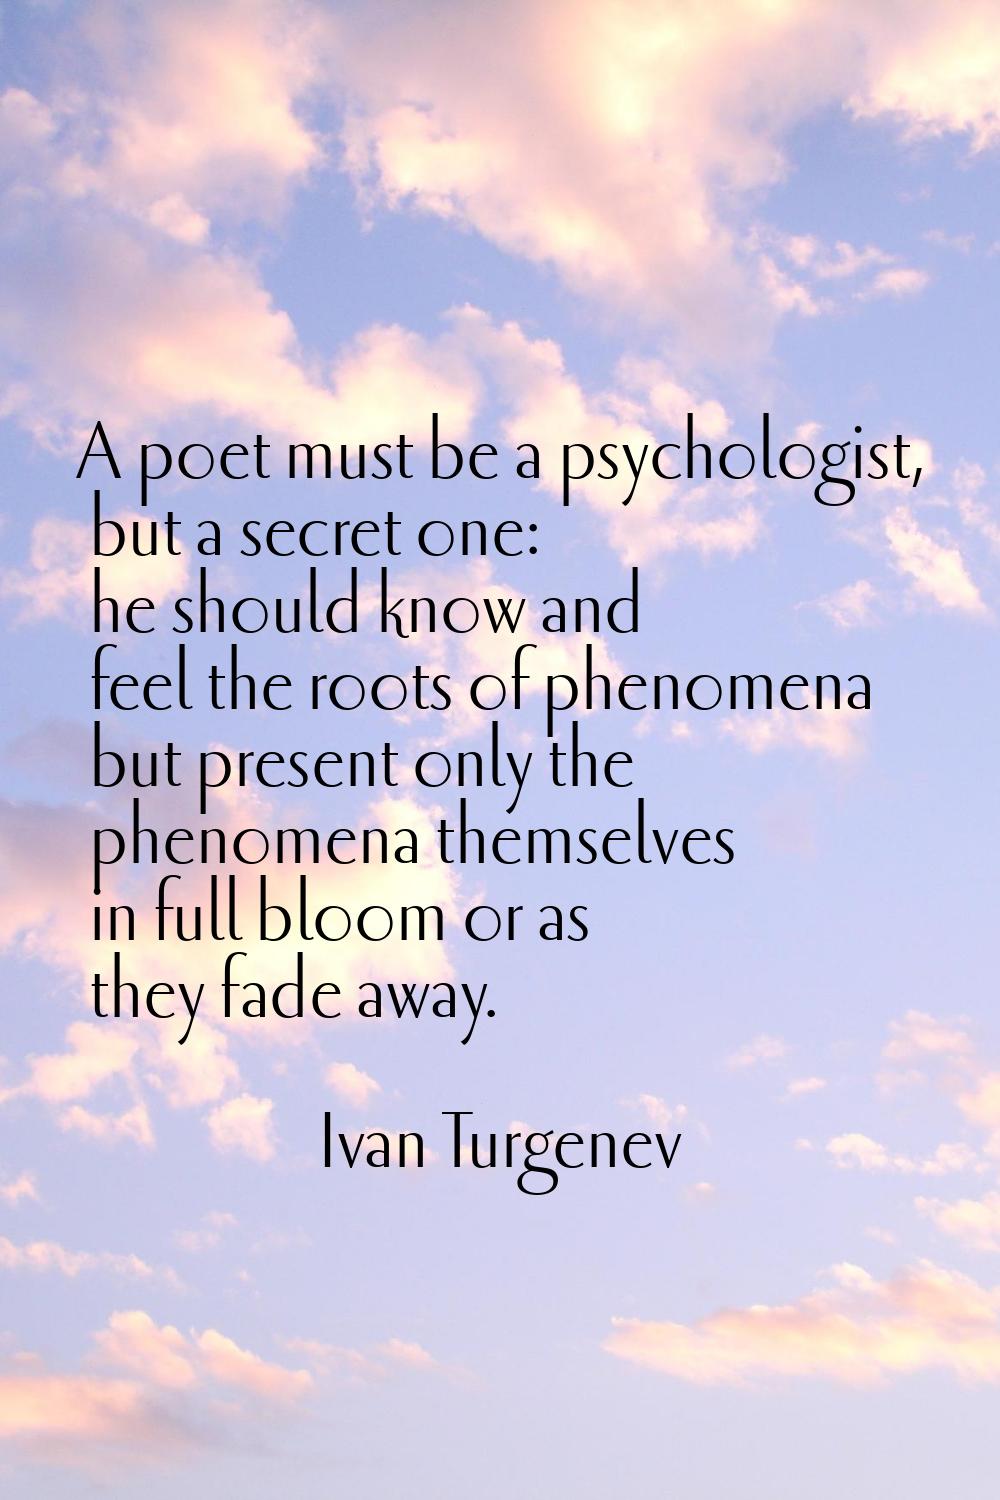 A poet must be a psychologist, but a secret one: he should know and feel the roots of phenomena but